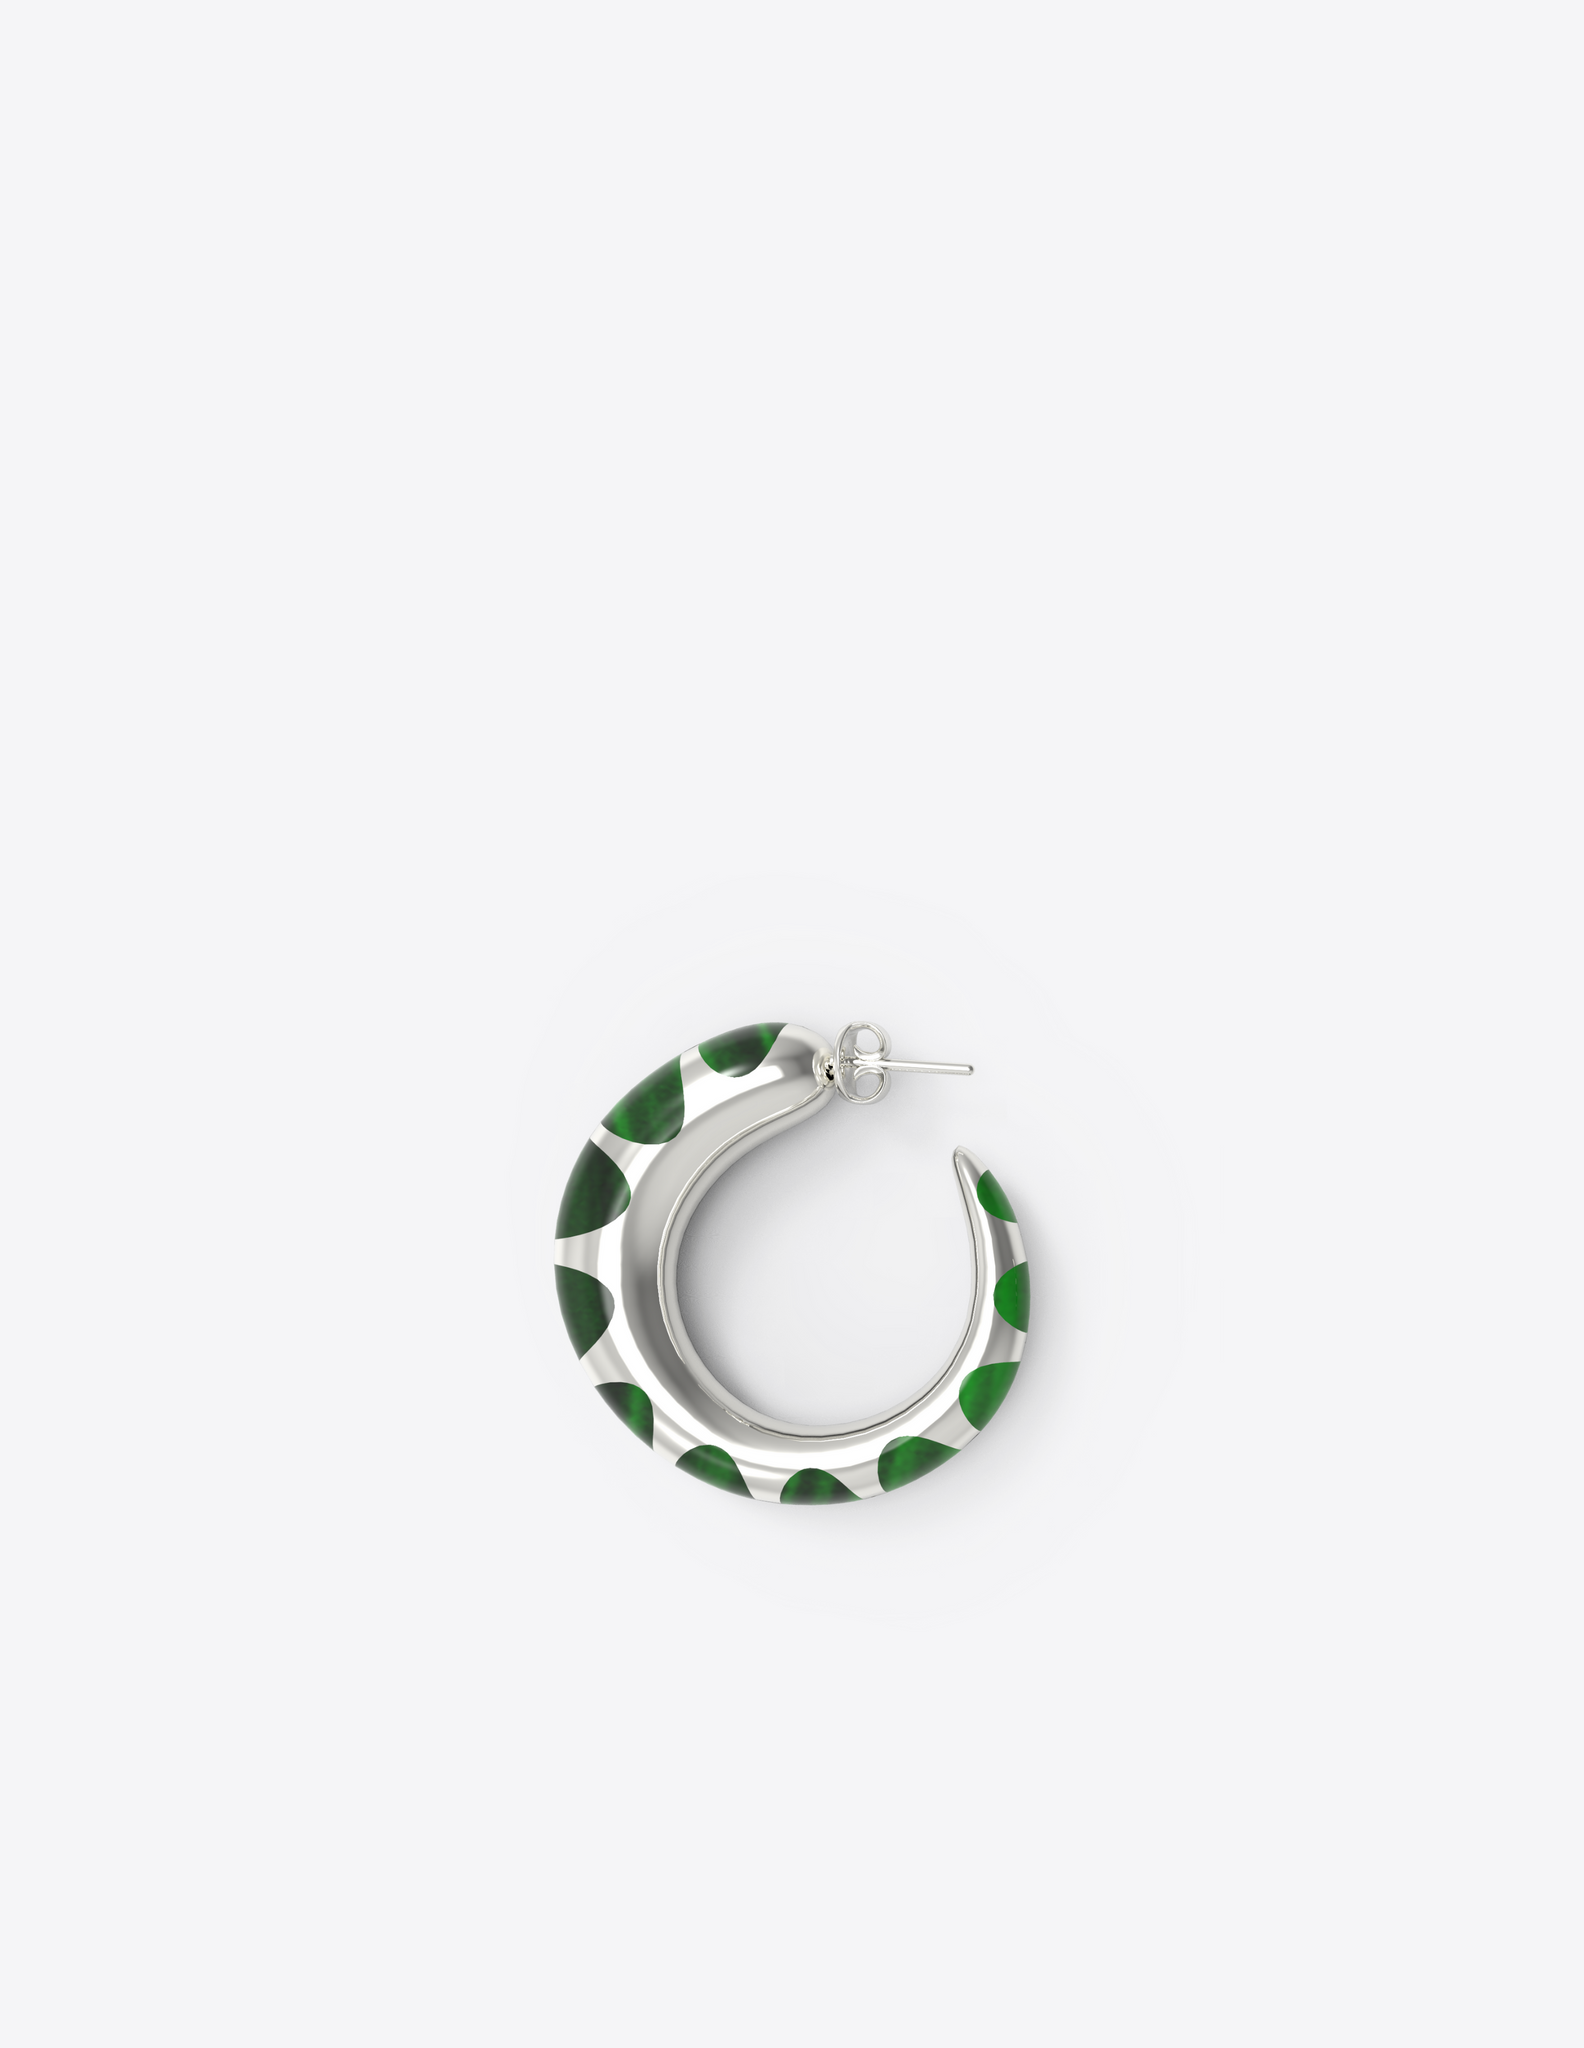 Tiny Khartoum Hoops with Striped Green Onyx Inlay in Sterling Silver